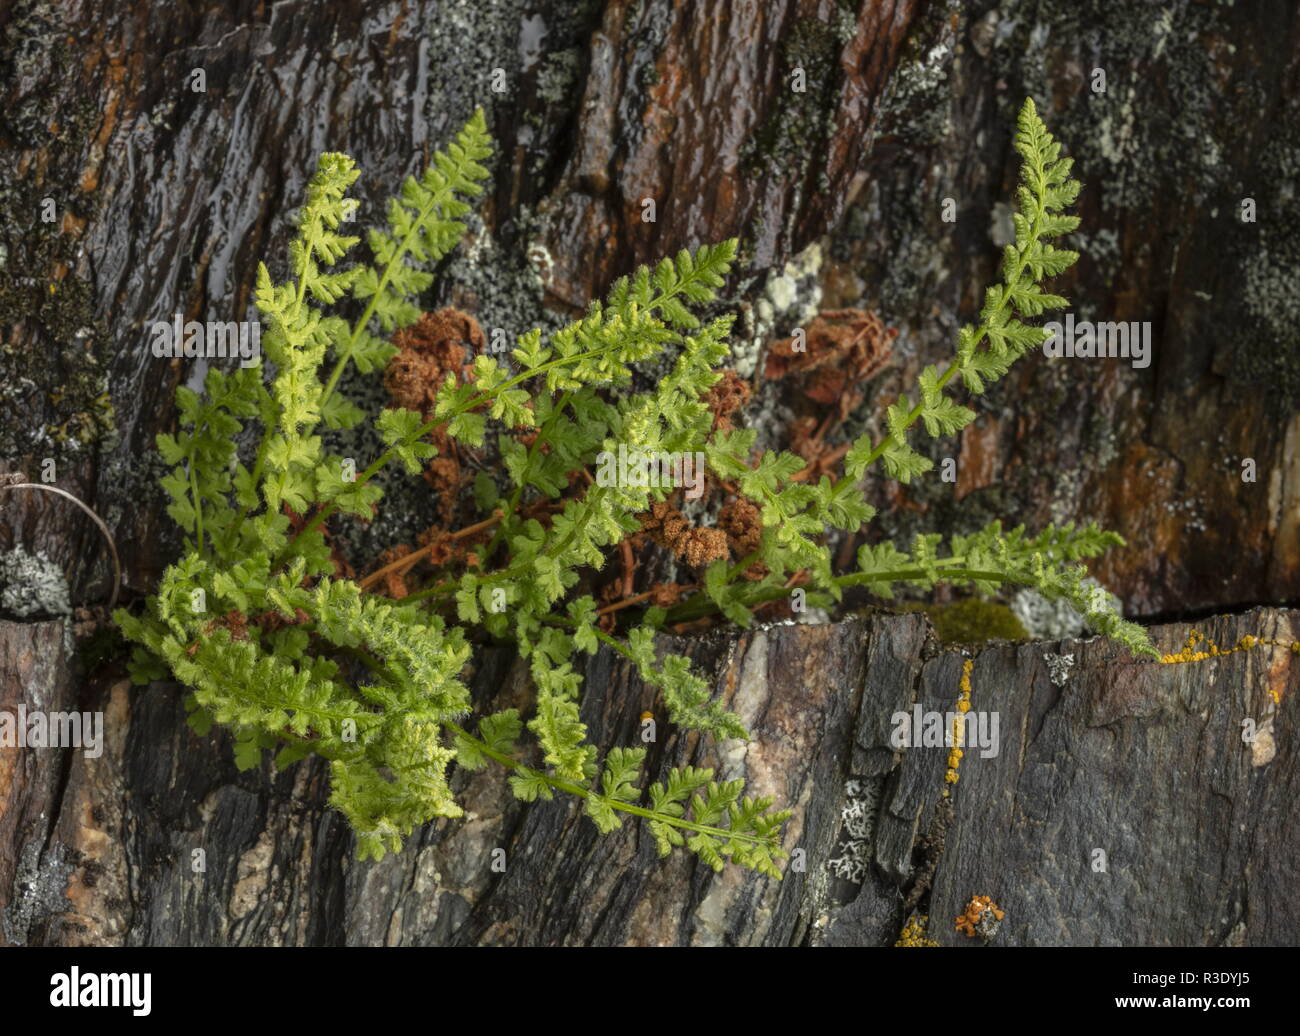 Oblong woodsia, Woodsia ilvensis, fern, in rock crevice. Very rare in UK. Stock Photo